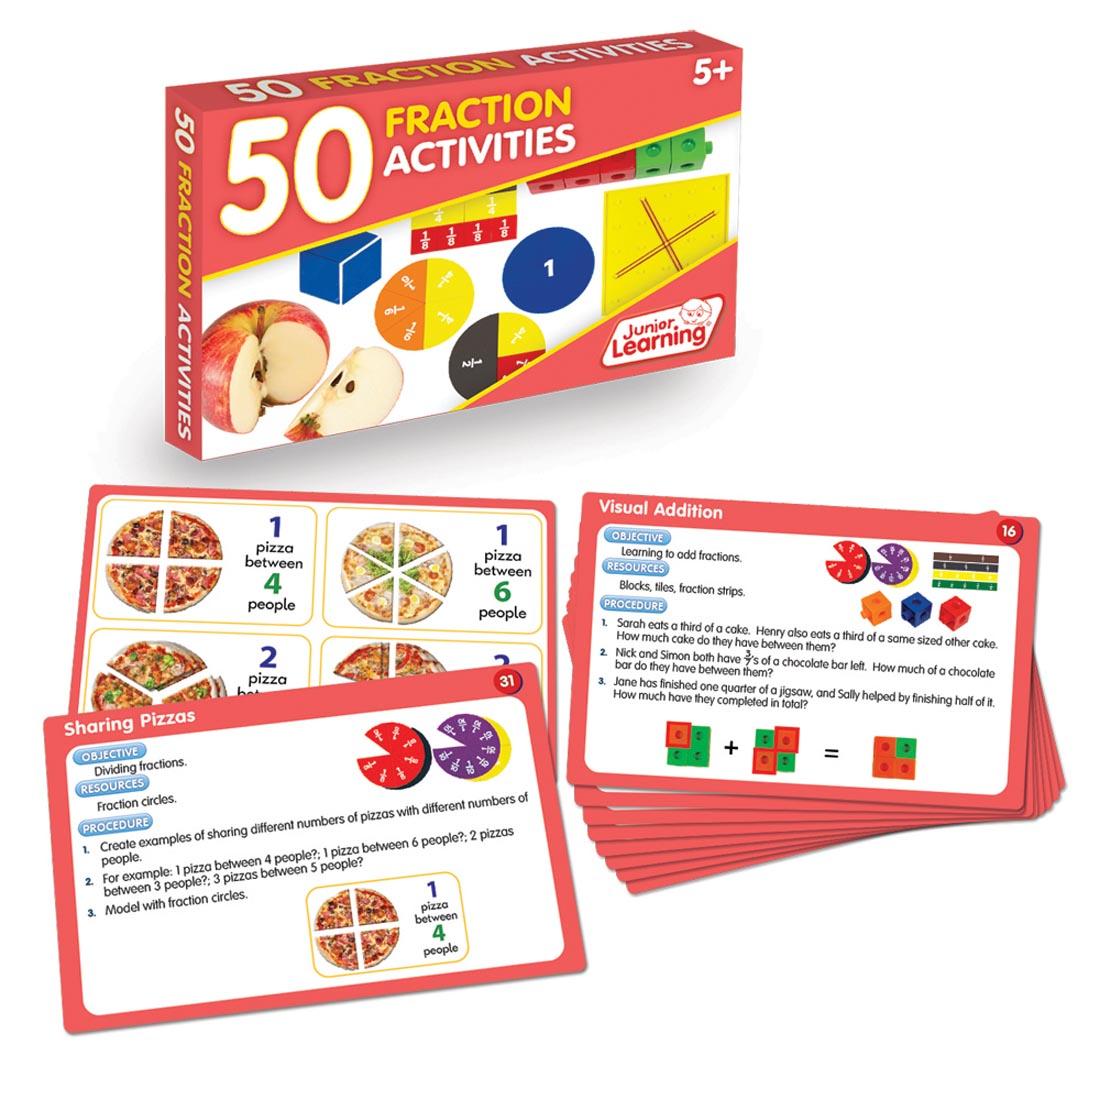 50 Fraction Activities by Junior Learning